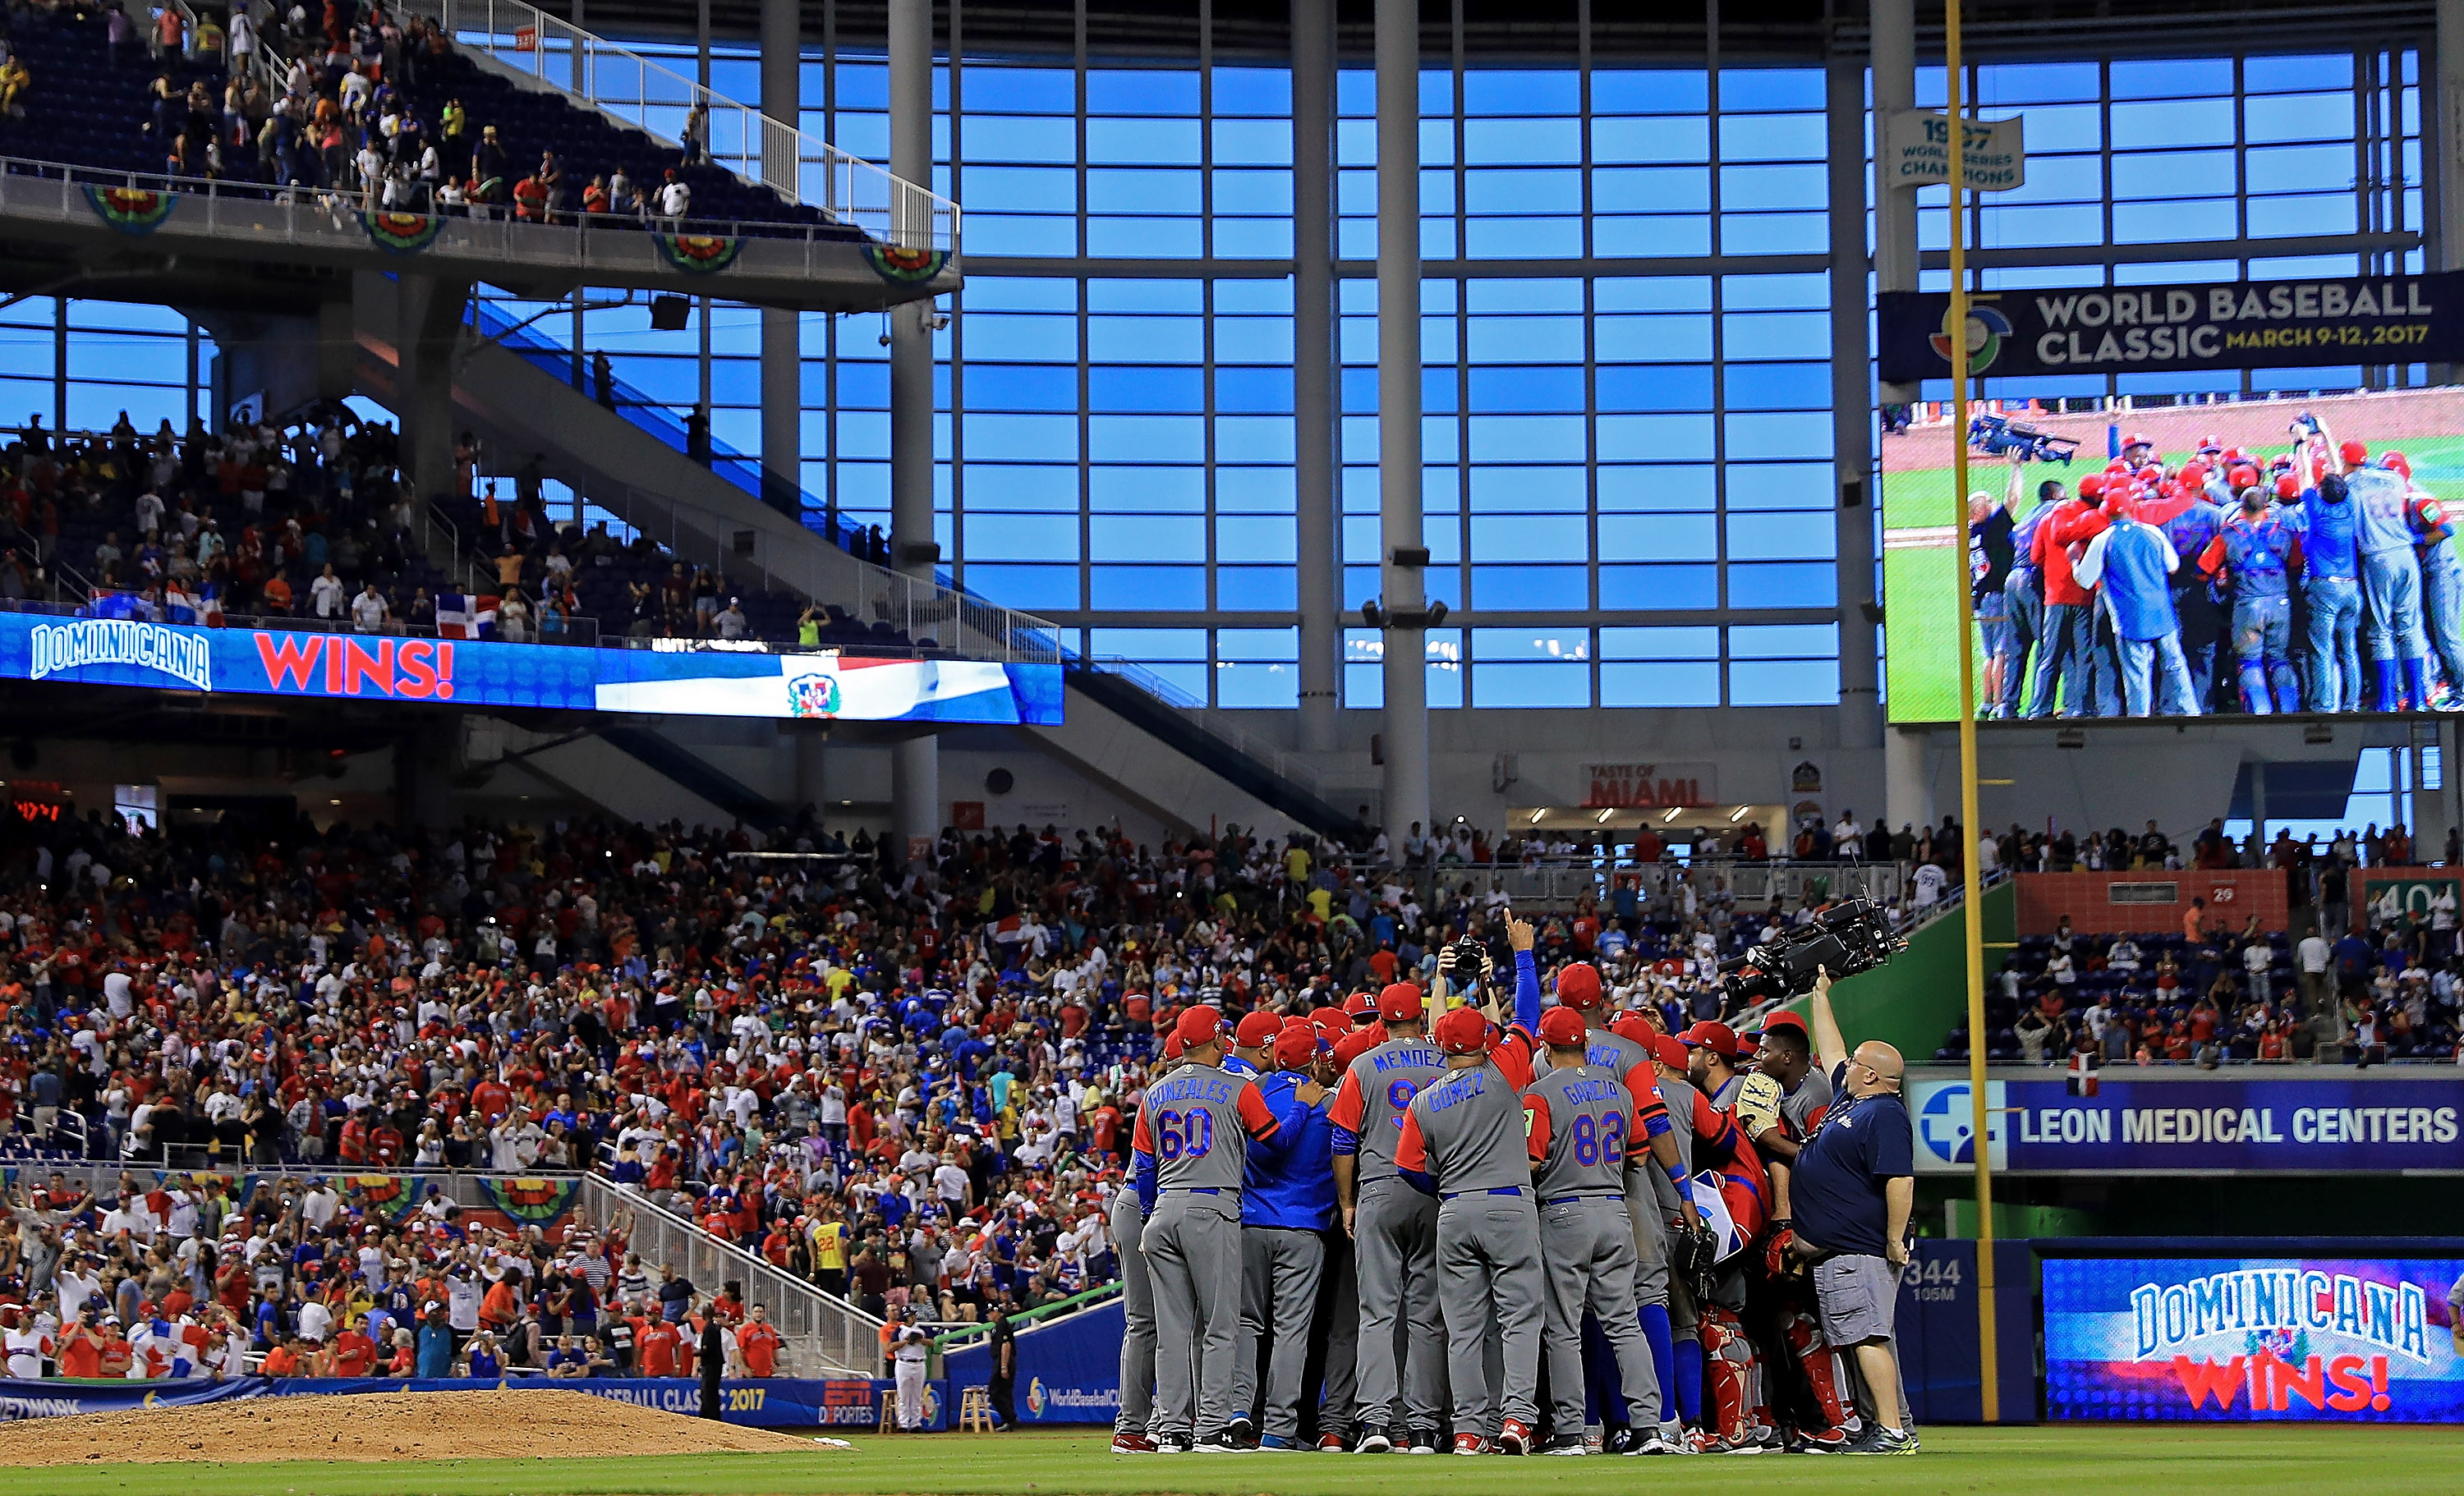 World Baseball Classic: Can Team USA increase interest in 2023 event?